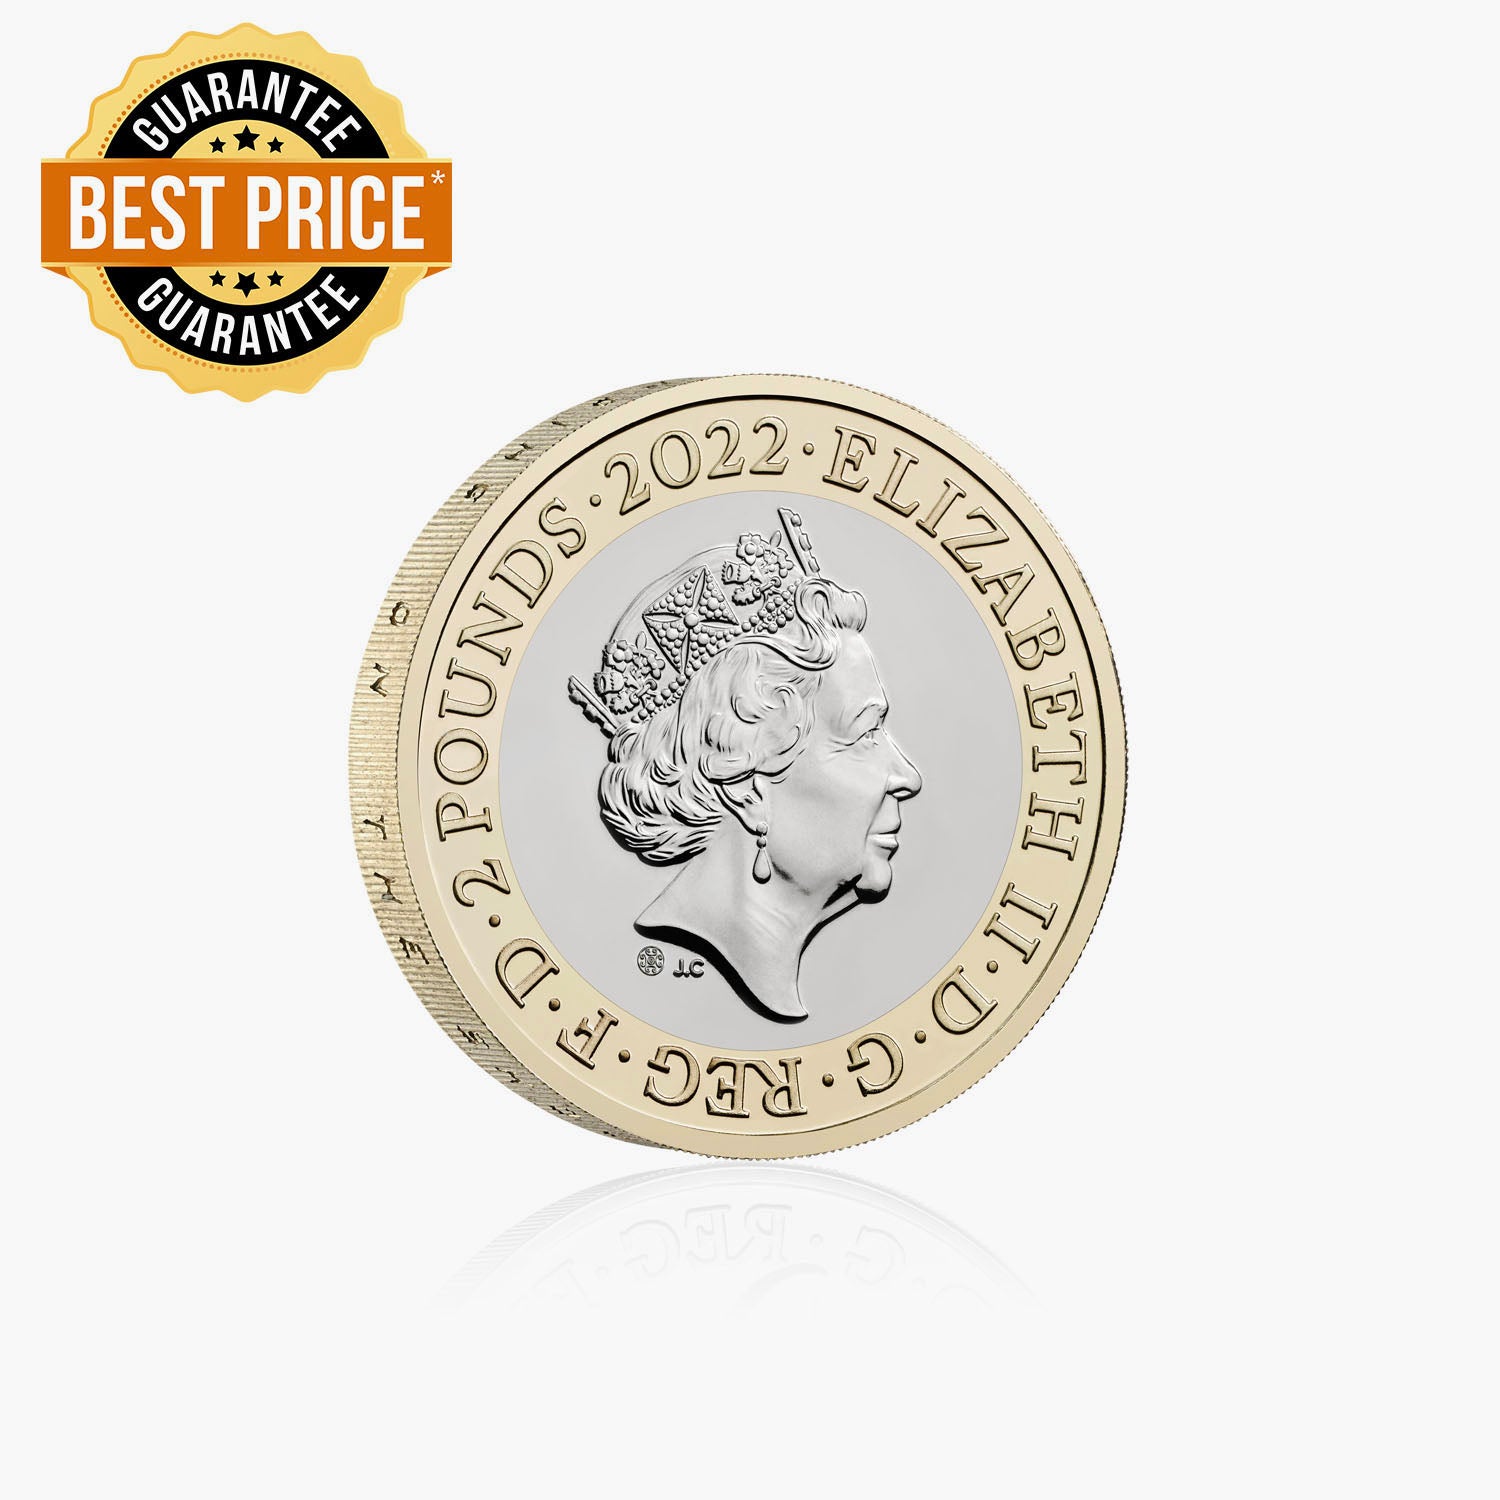 Celebrating 25 Years of the £2 2022 £2 Brilliant Uncirculated Coin